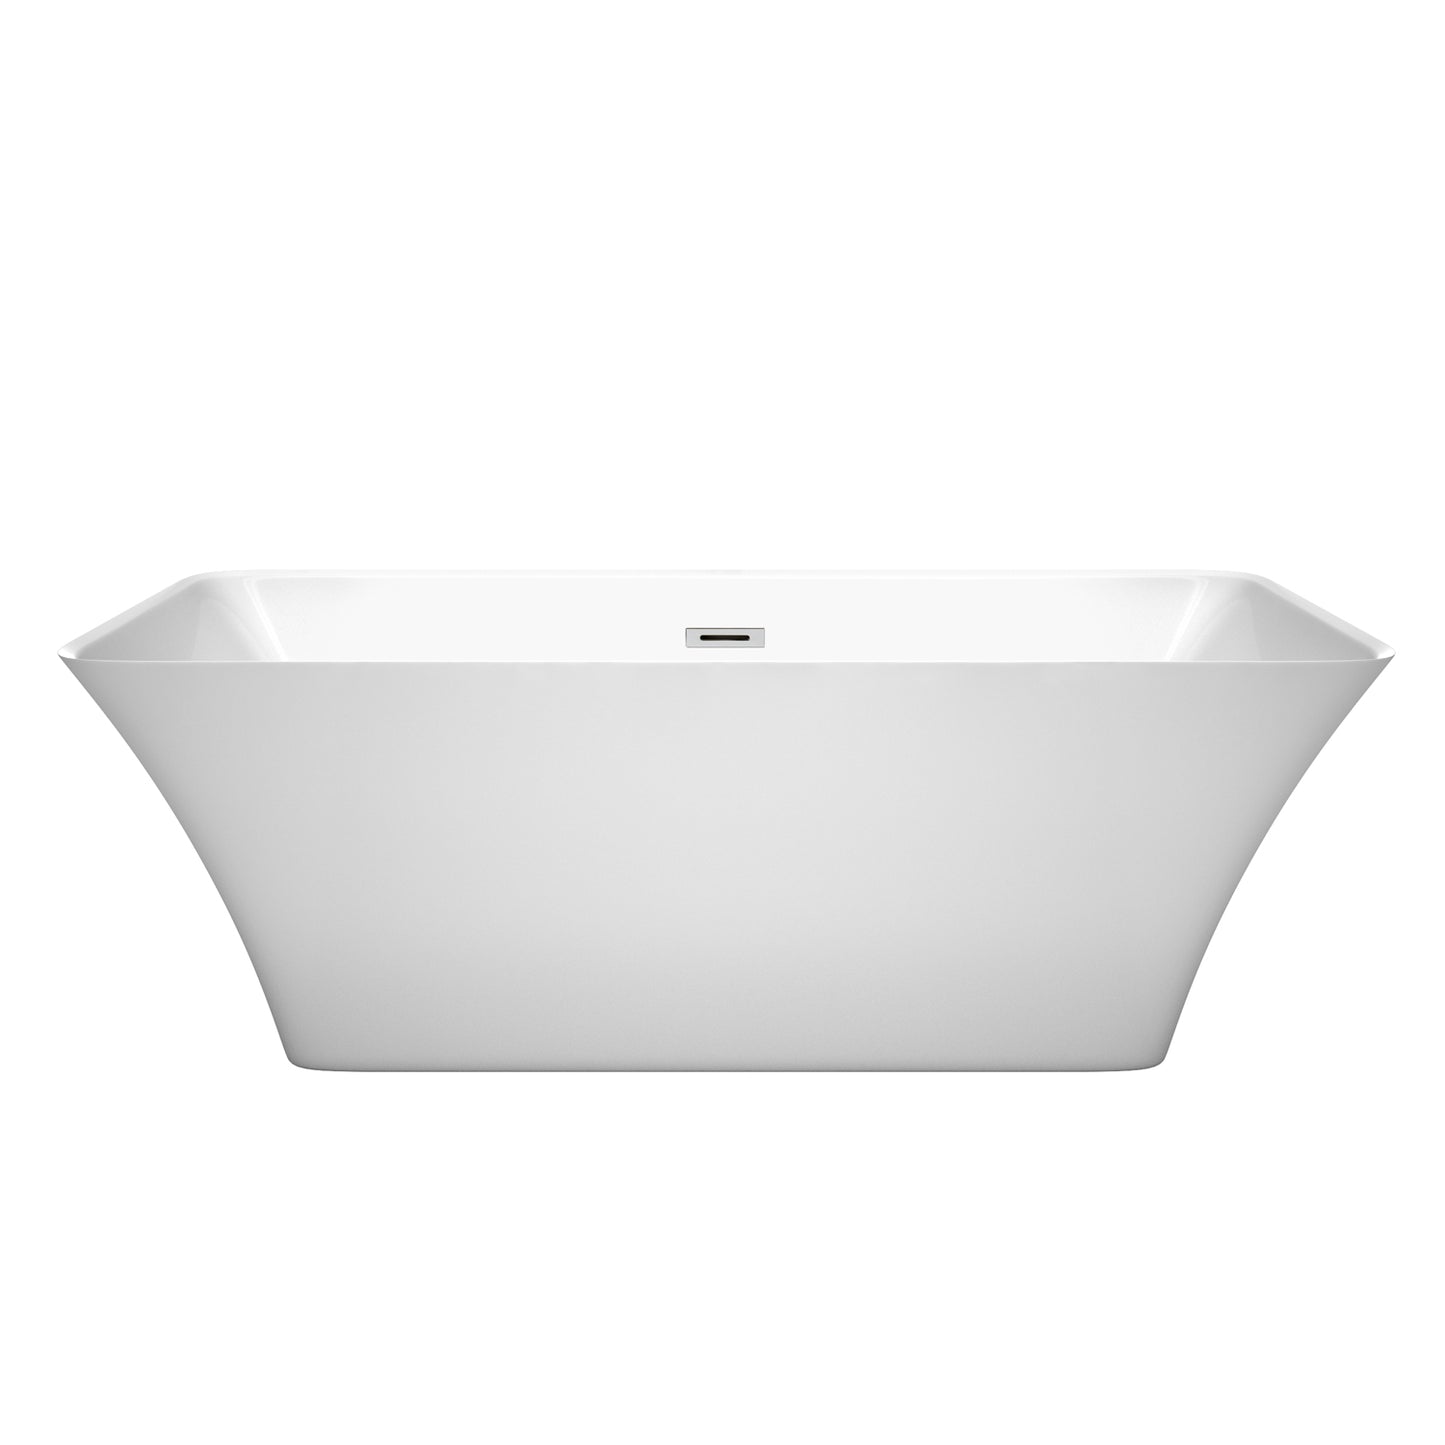 67 inch Freestanding Bathtub in White with Polished Chrome Drain and Overflow Trim - Luxe Bathroom Vanities Luxury Bathroom Fixtures Bathroom Furniture